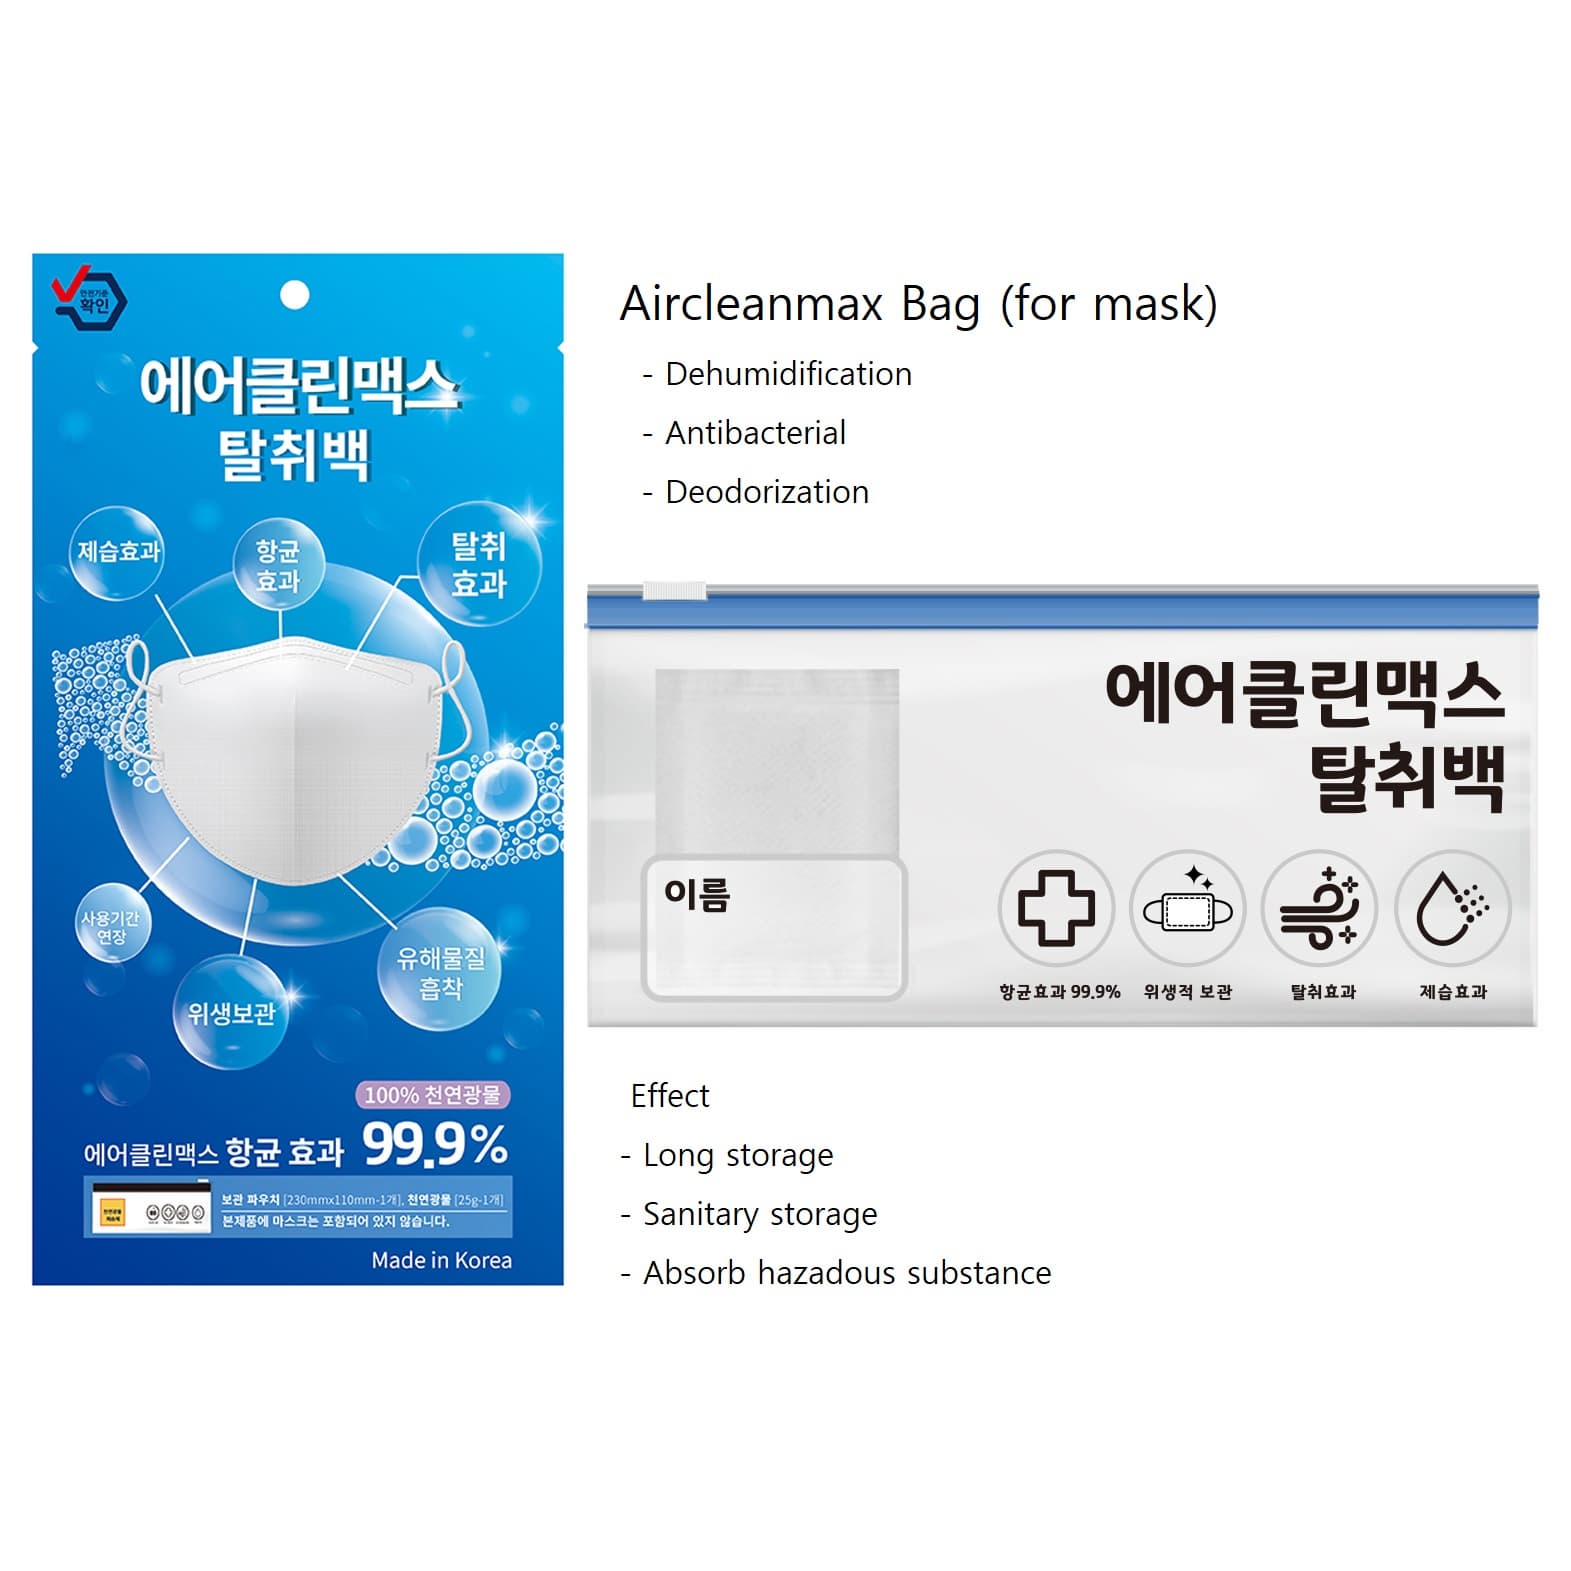 Personal care for mask Aircleanmax bag